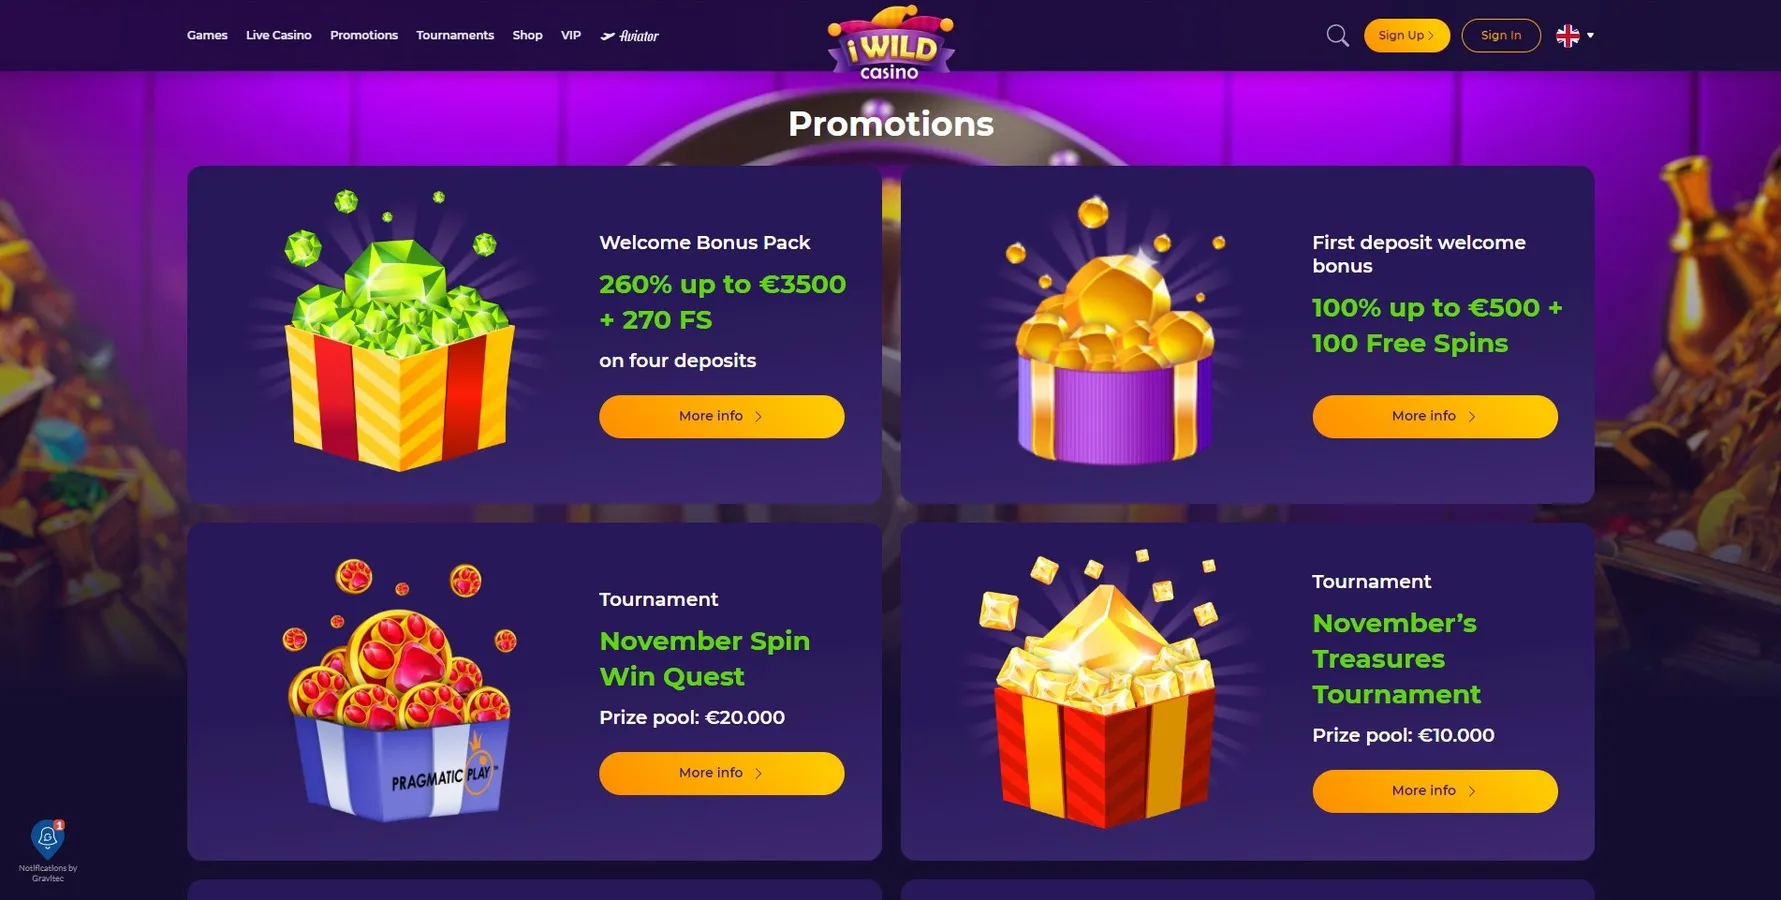 Promotions and Bonuses at iWildCasino